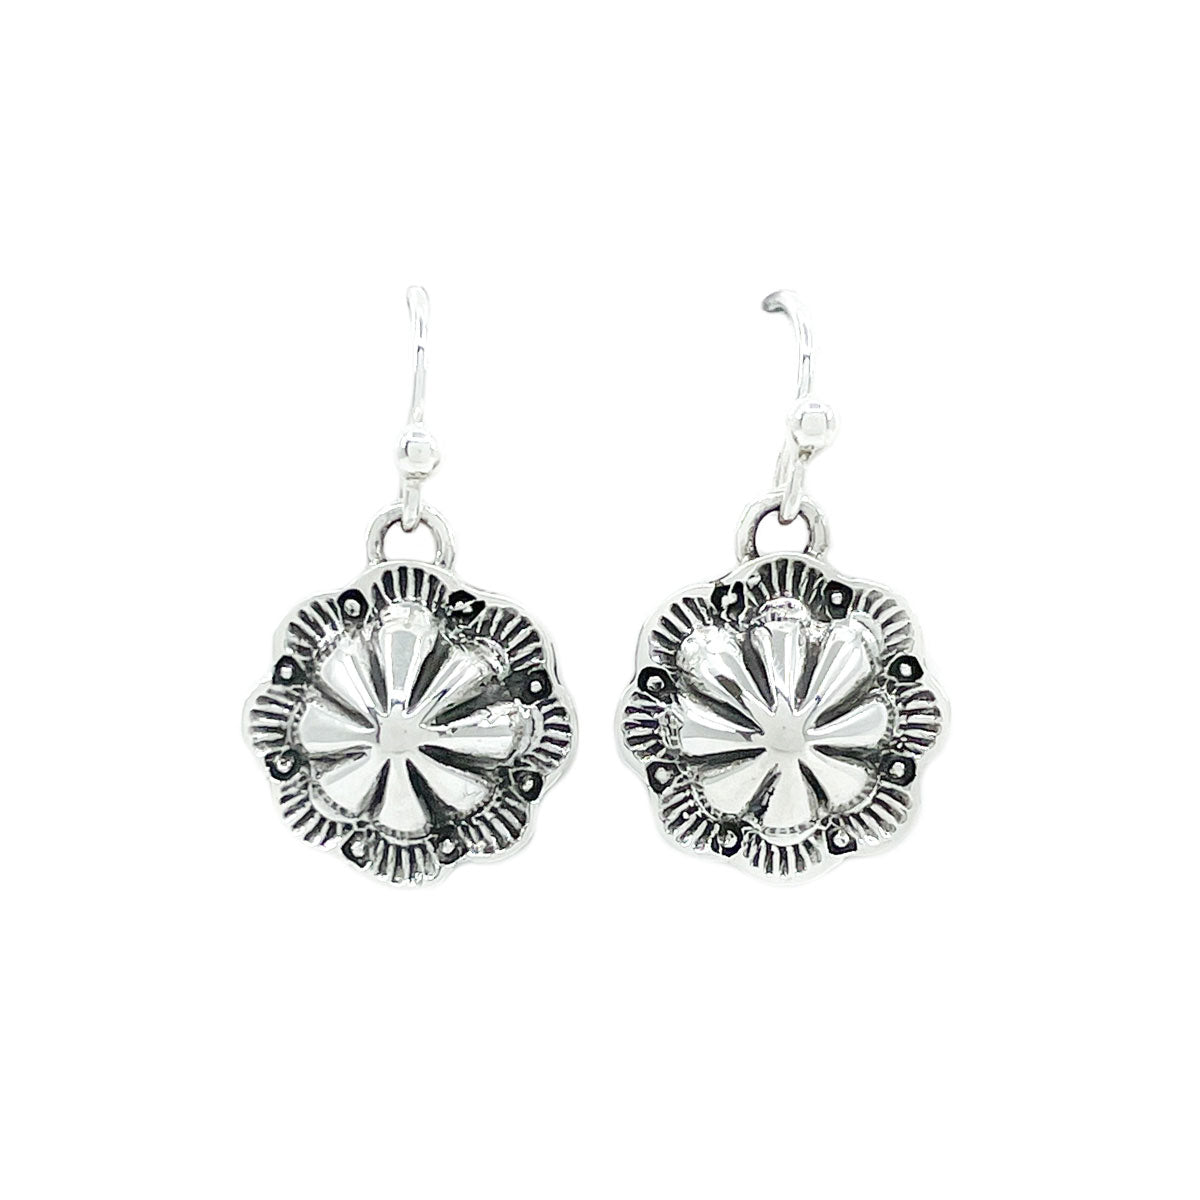 Load image into Gallery viewer, Sterling silver dangling concho blossom earrings by Diné silversmith Raymond Coriz Hand stamped with repousse work and sterling silver wires Measures .50 inches in diameter,  Dangles form ear lobe approx. 1 inch
